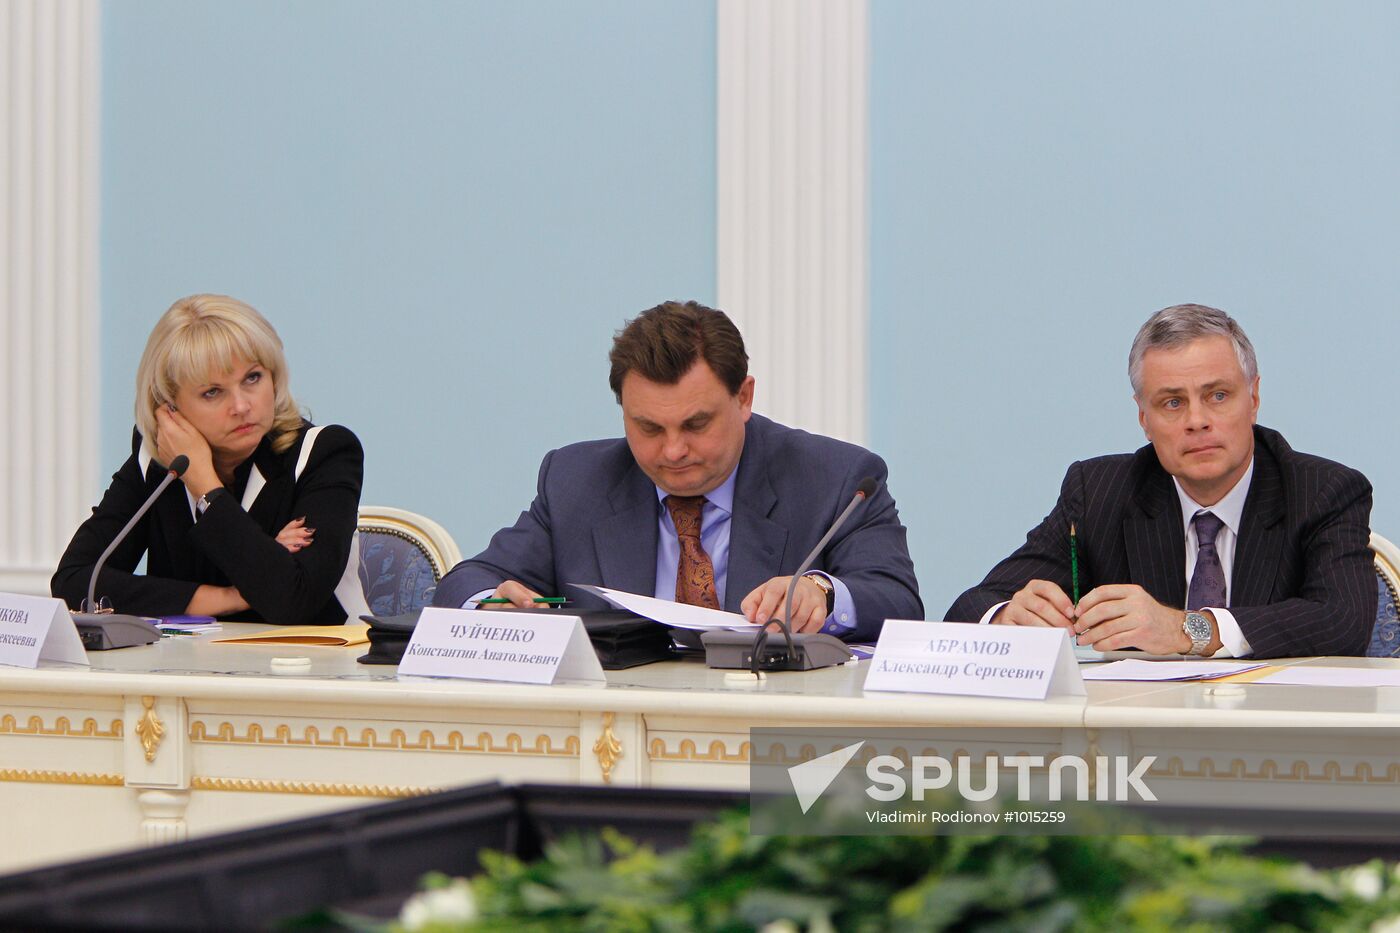 State Council meeting in Saransk